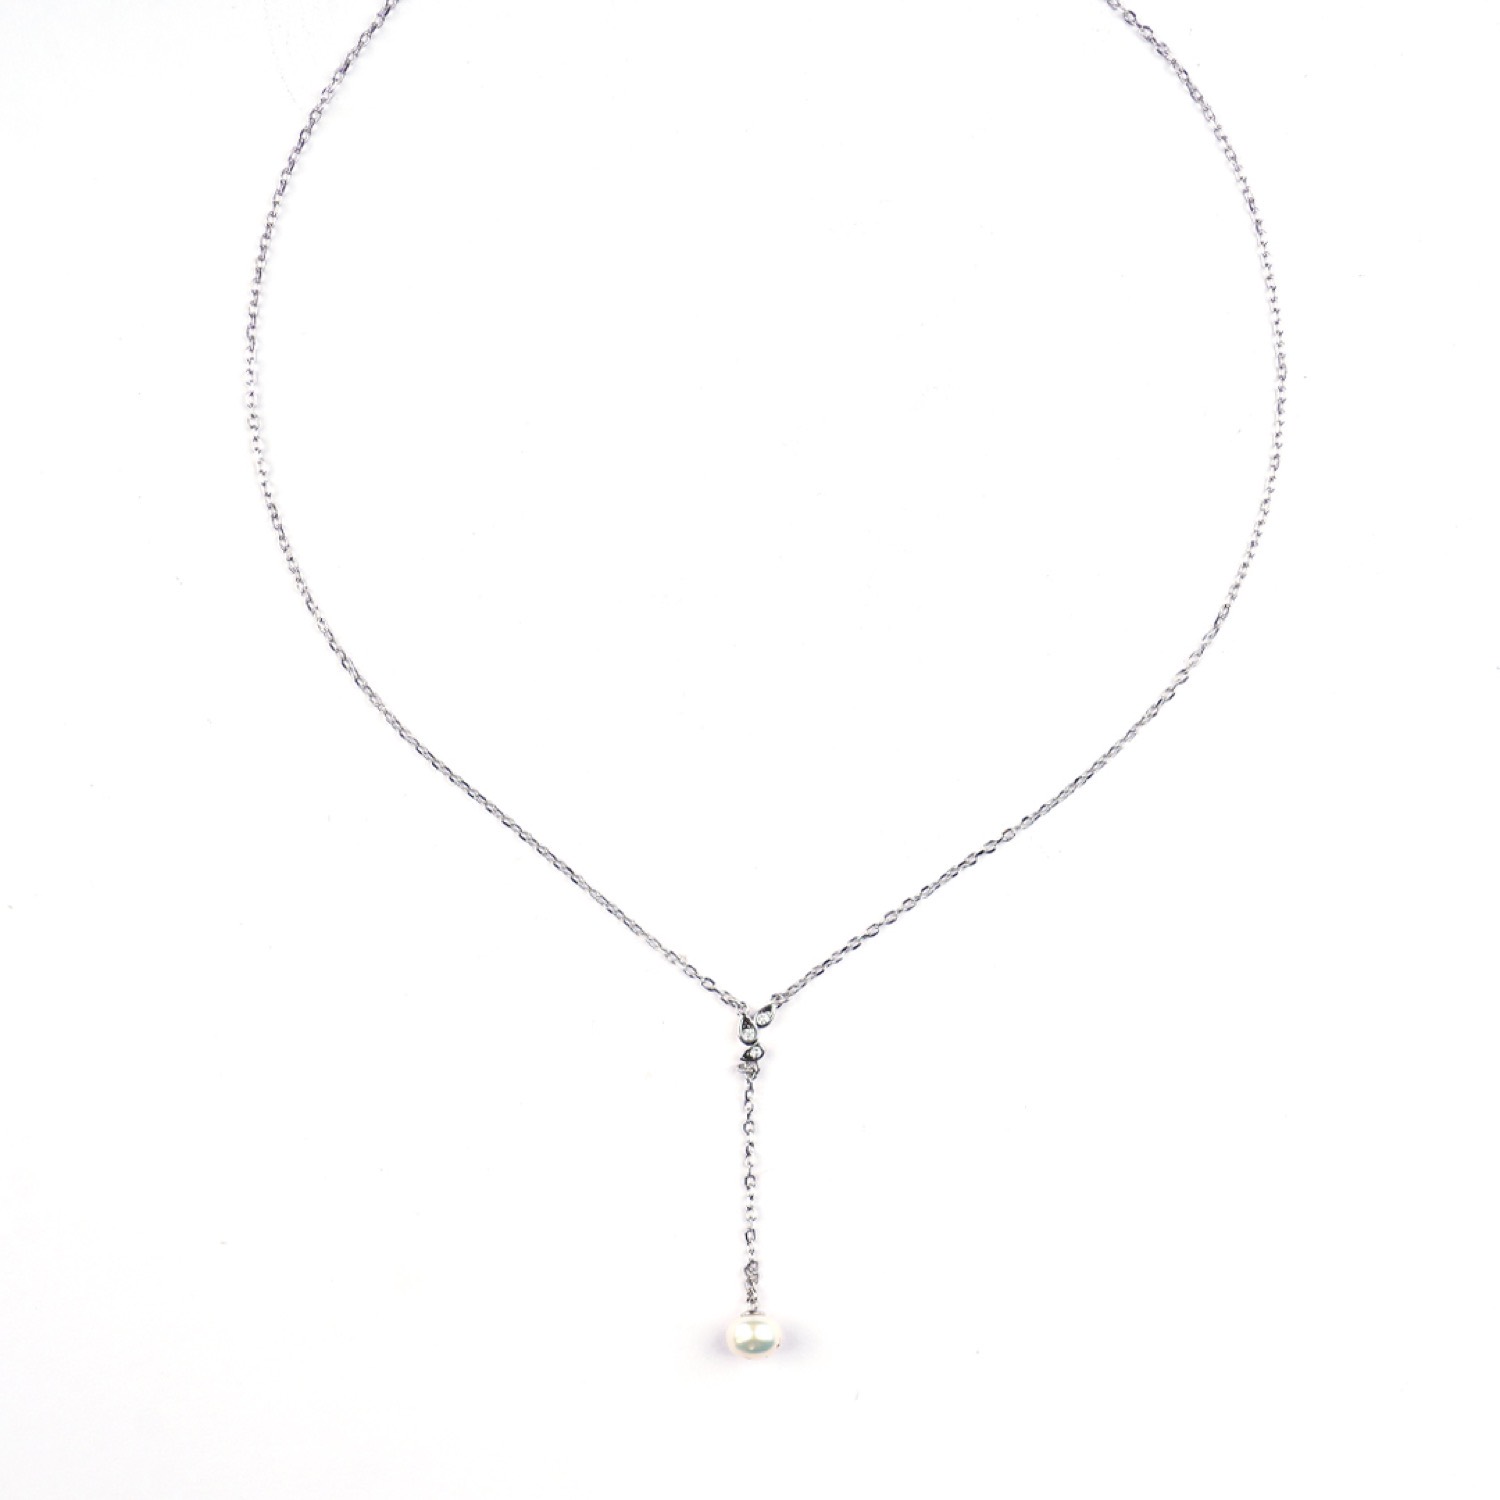 varam_chains_072022_white_pearl_pendant_silver_chain_with_earrings_1-1